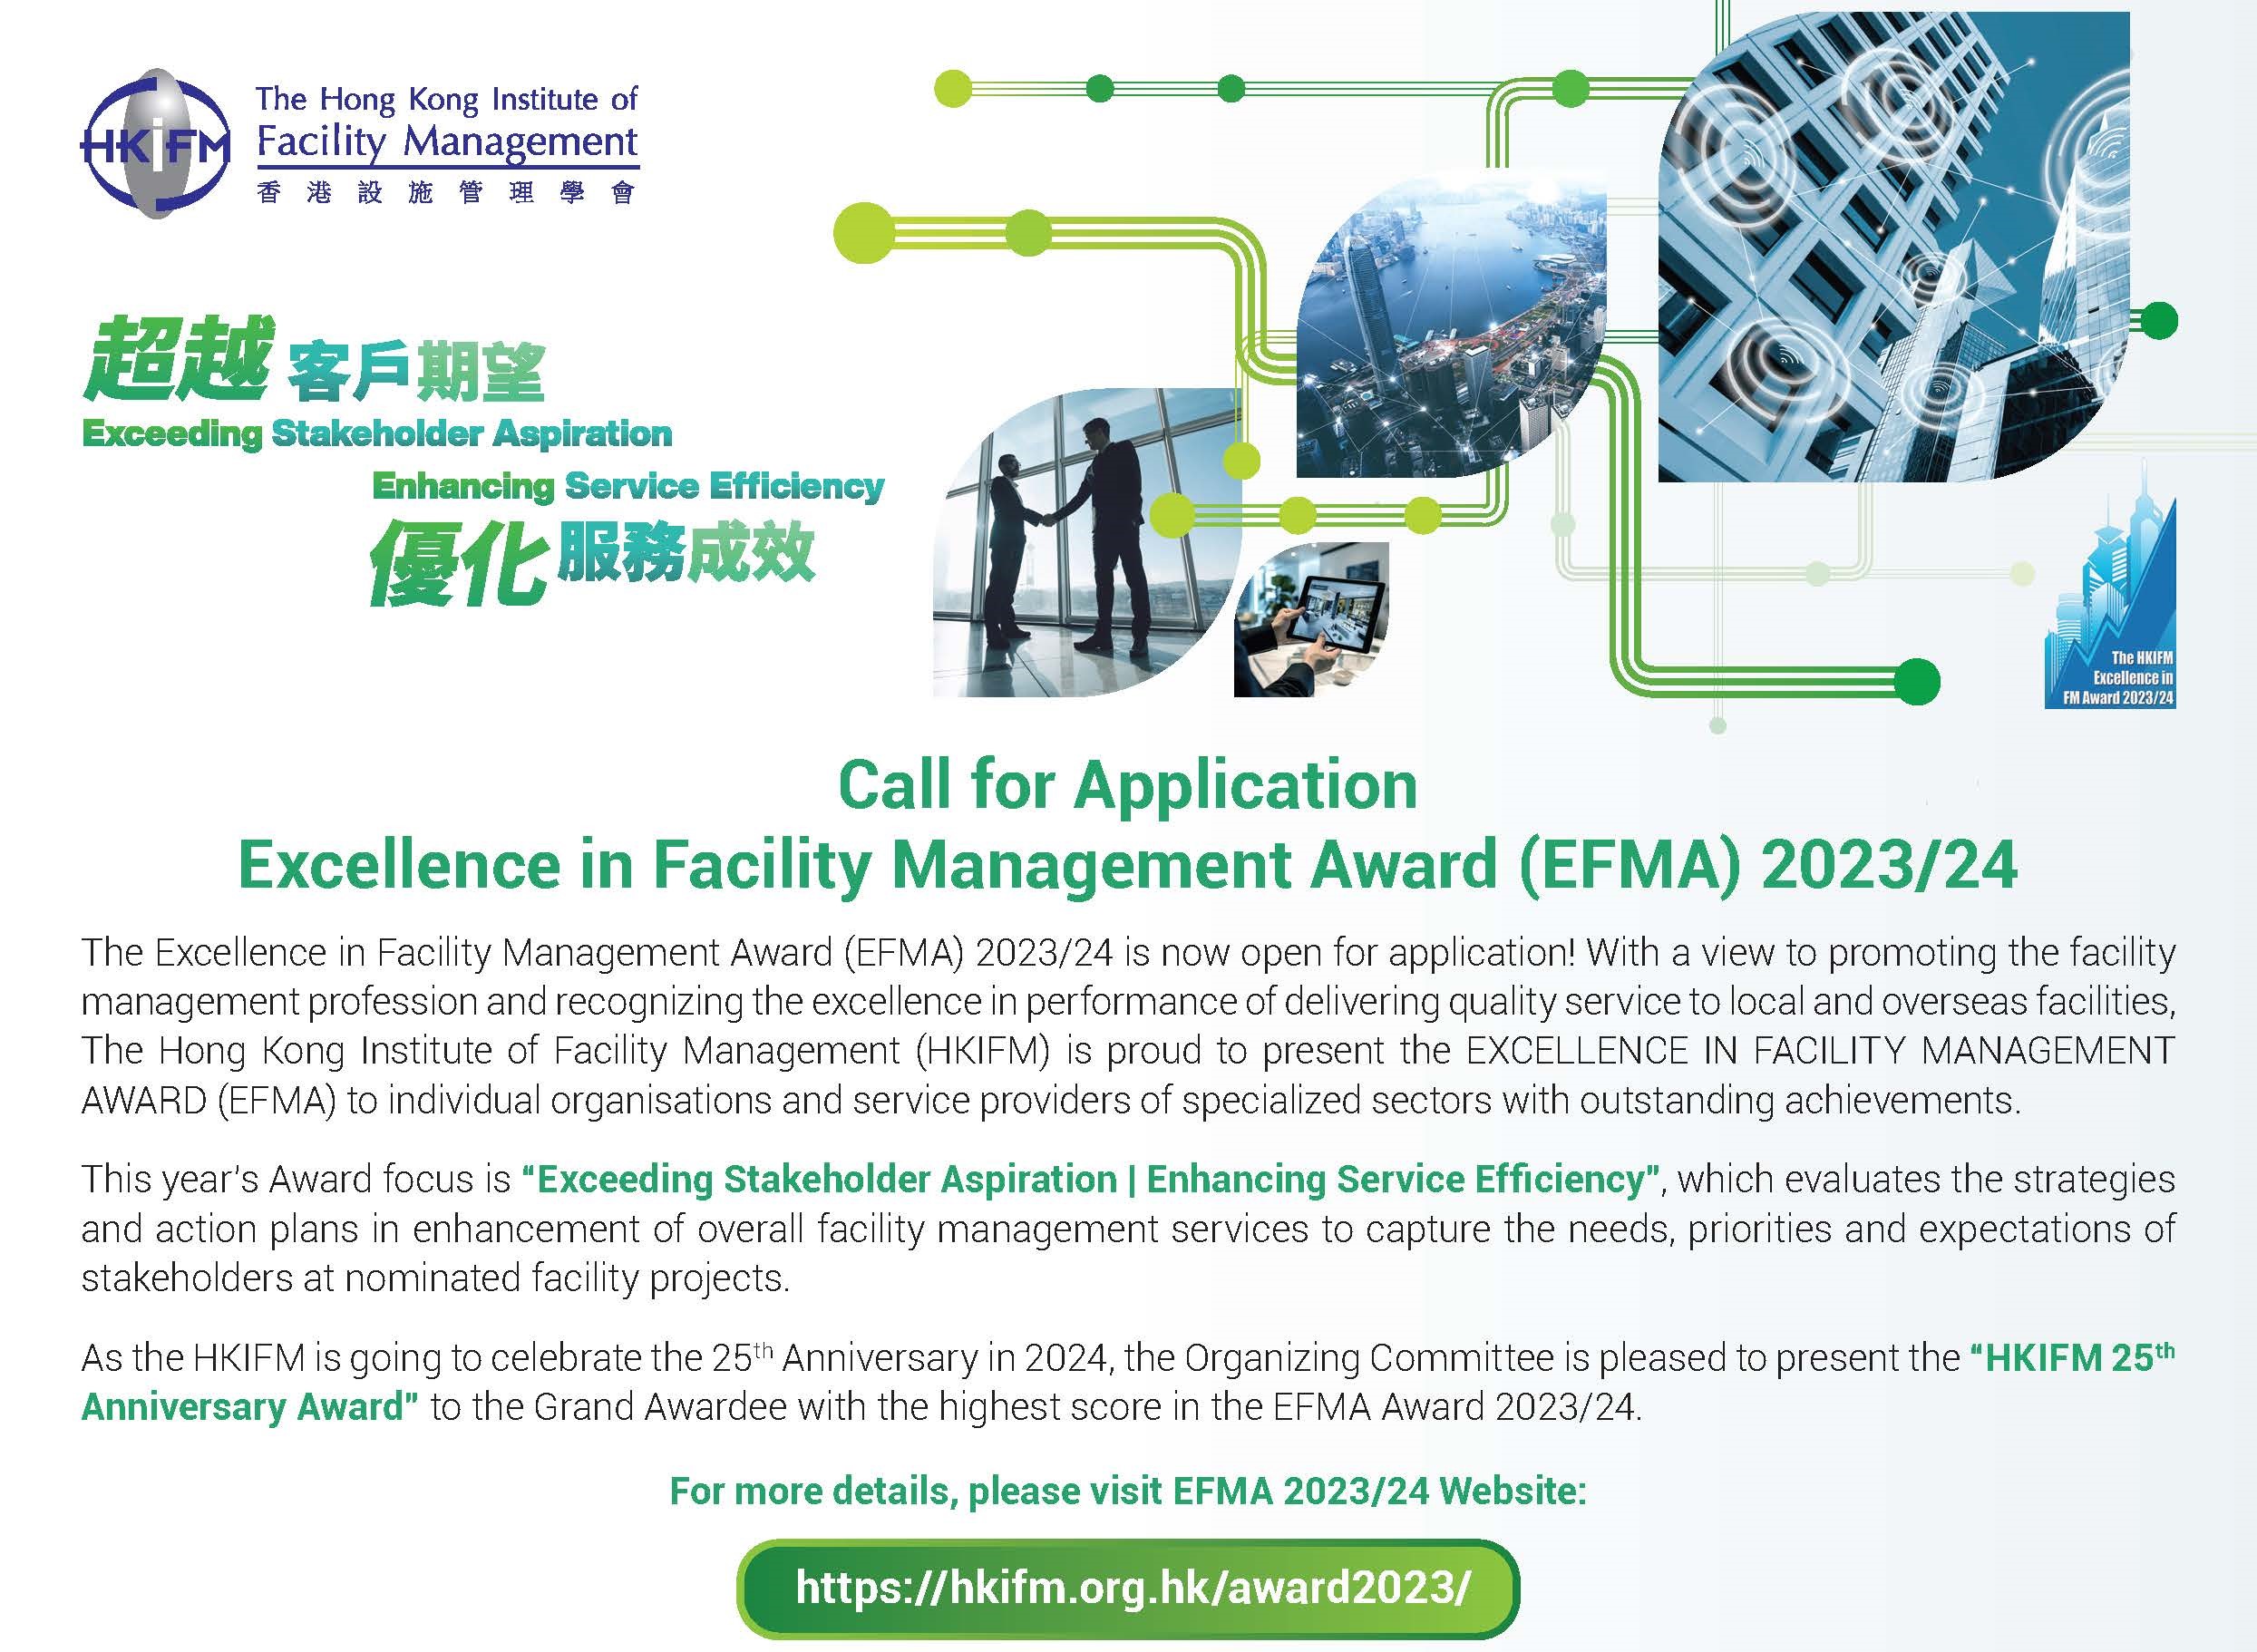 Excellence in Facility Management Award (EFMA) 2023/24